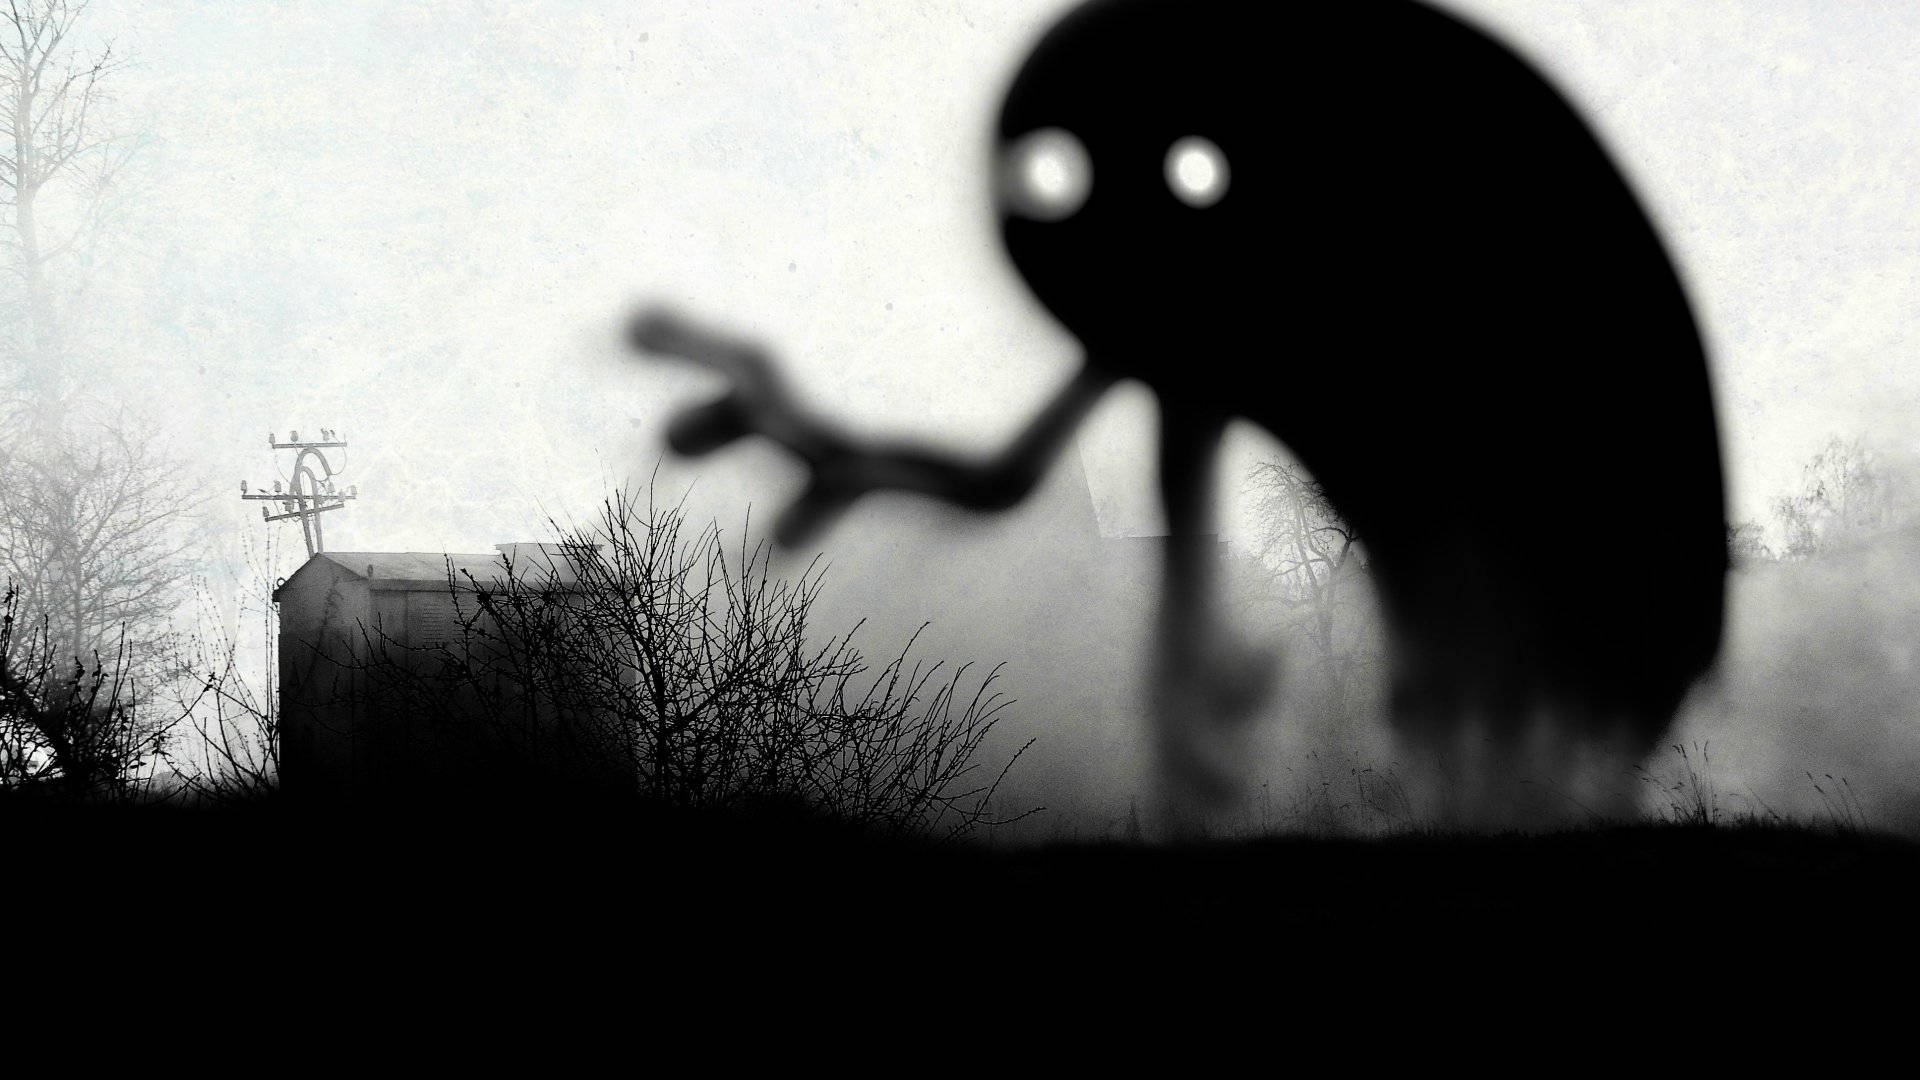 Feel the spooky atmosphere emanating from this image Wallpaper